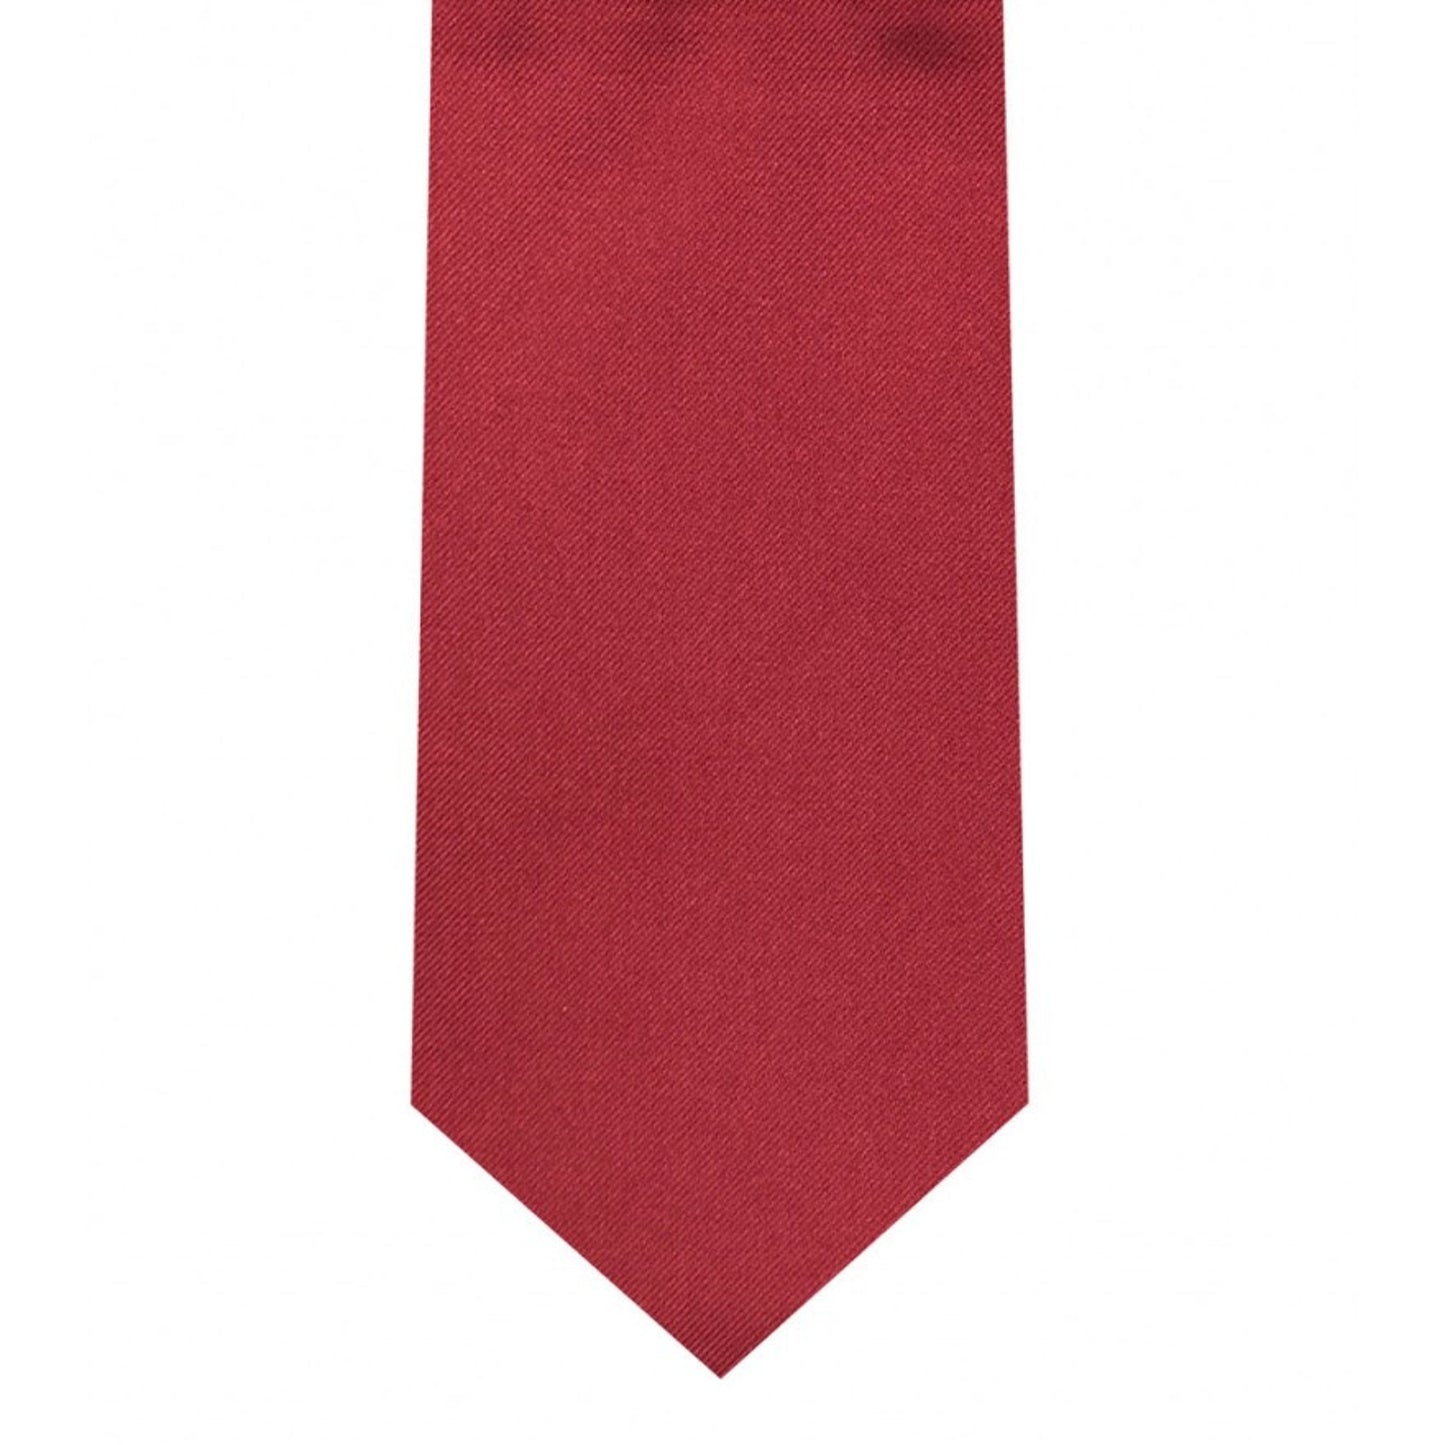 Classic Apple Red Tie Skinny width 2.75 inches With Matching Pocket Square | KCT Menswear